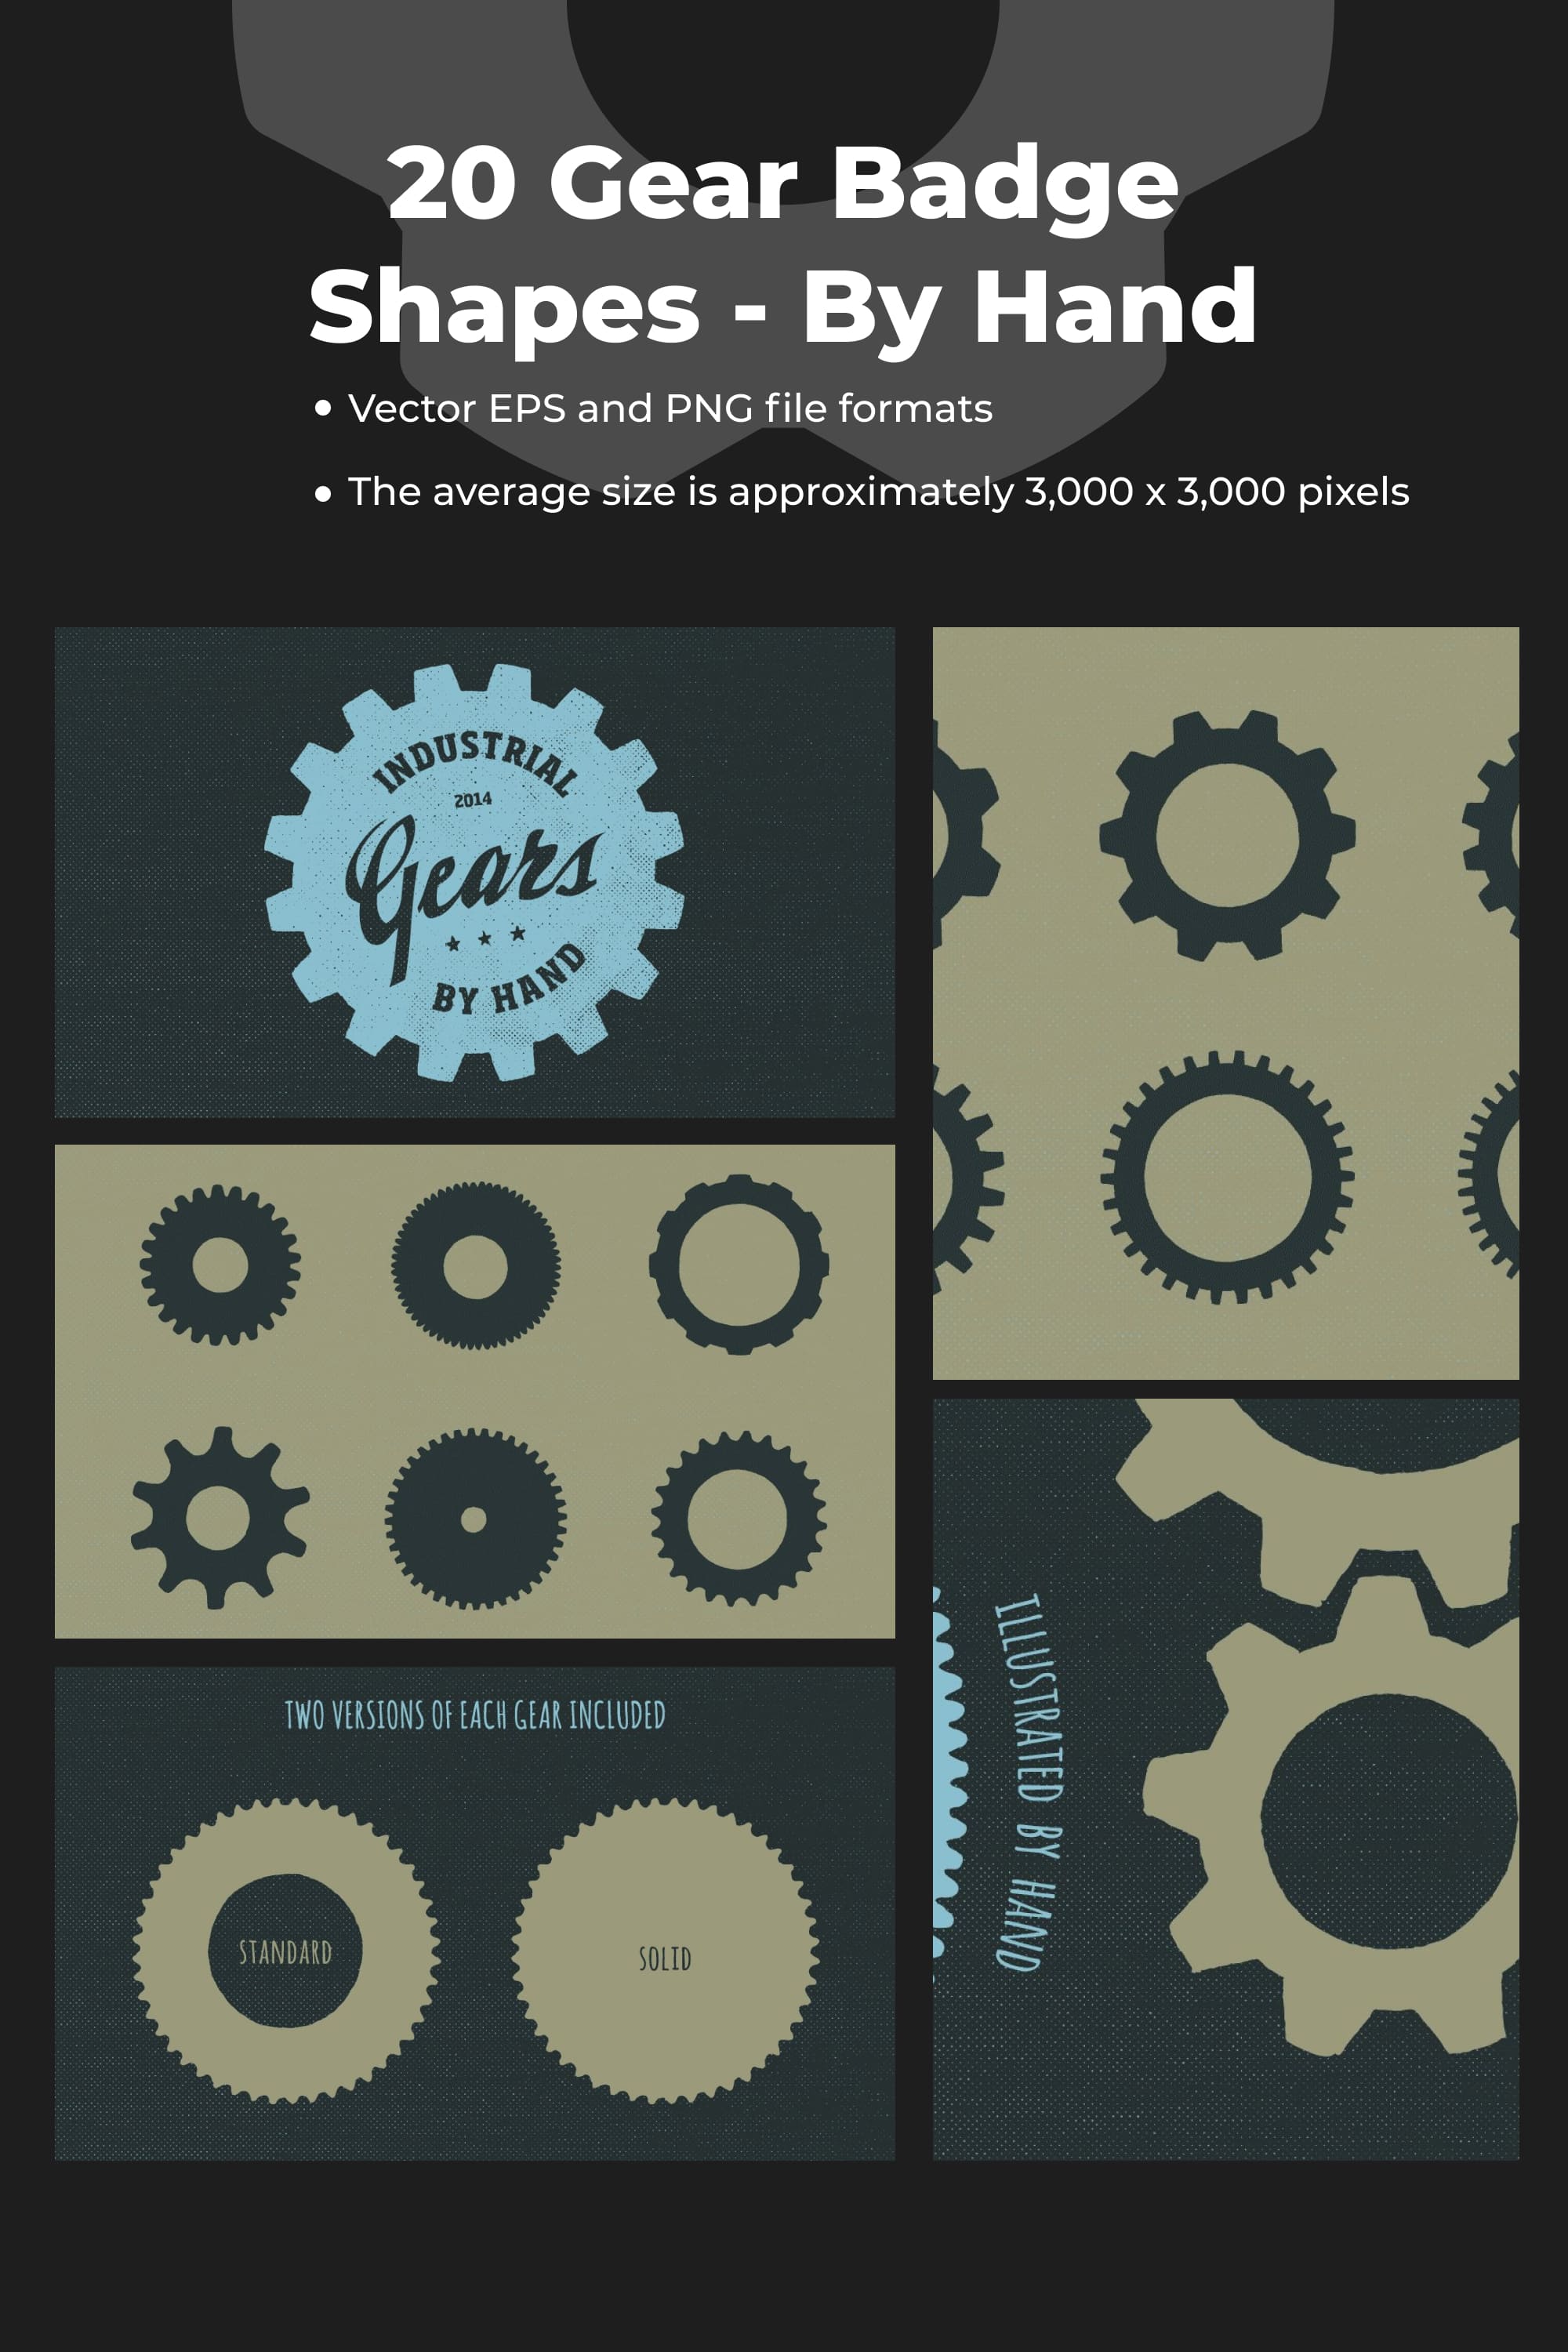 20 gear badge shapes by hand pinterest.